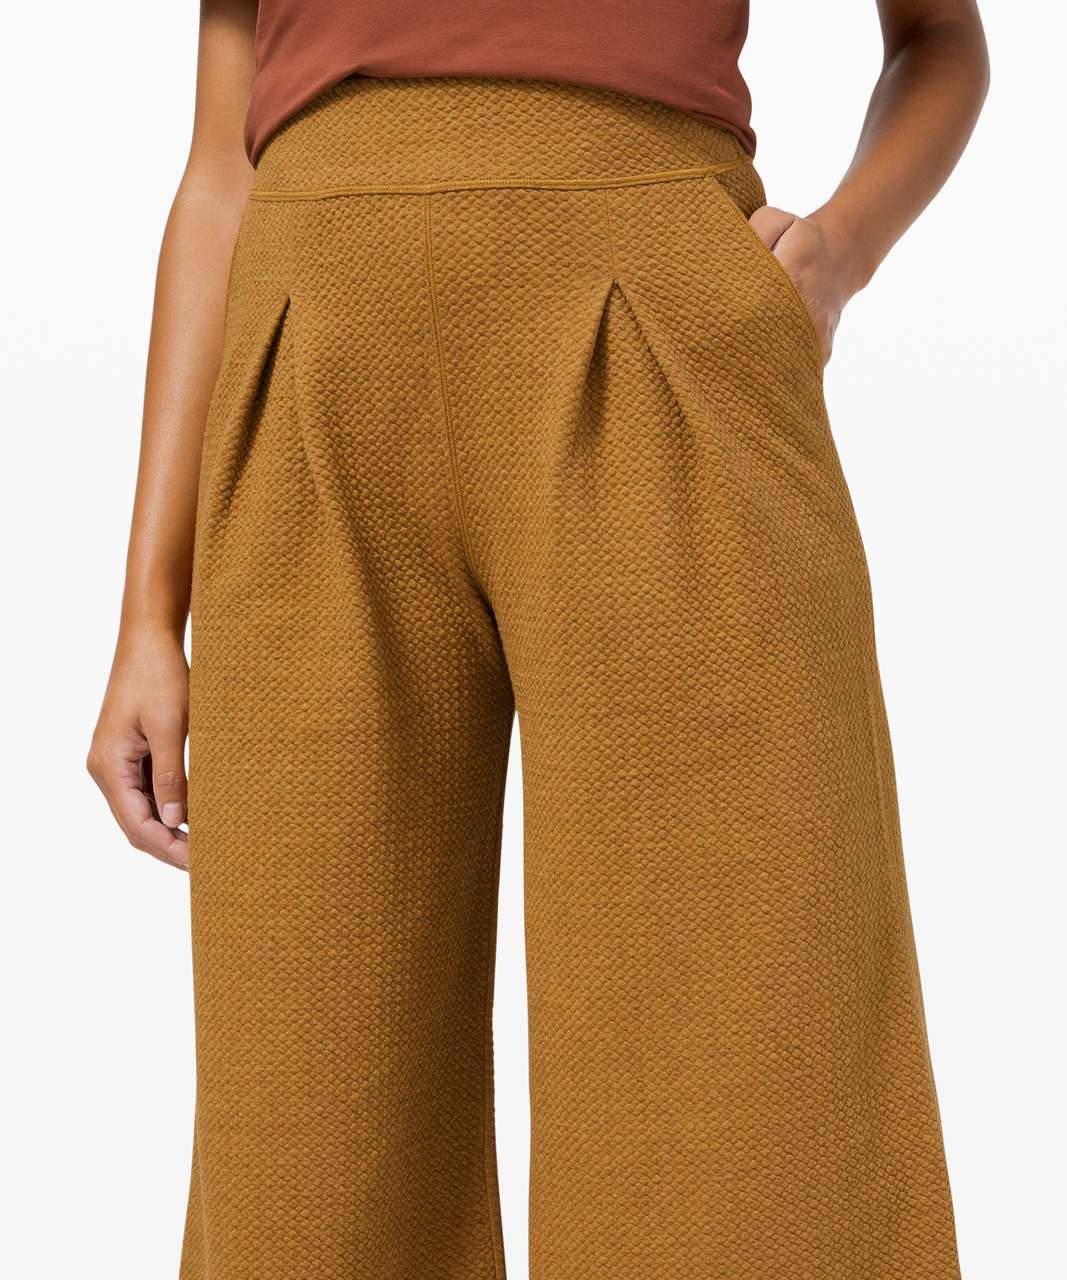 Lululemon Can You Feel The Pleat Crop - Heathered Spiced Bronze